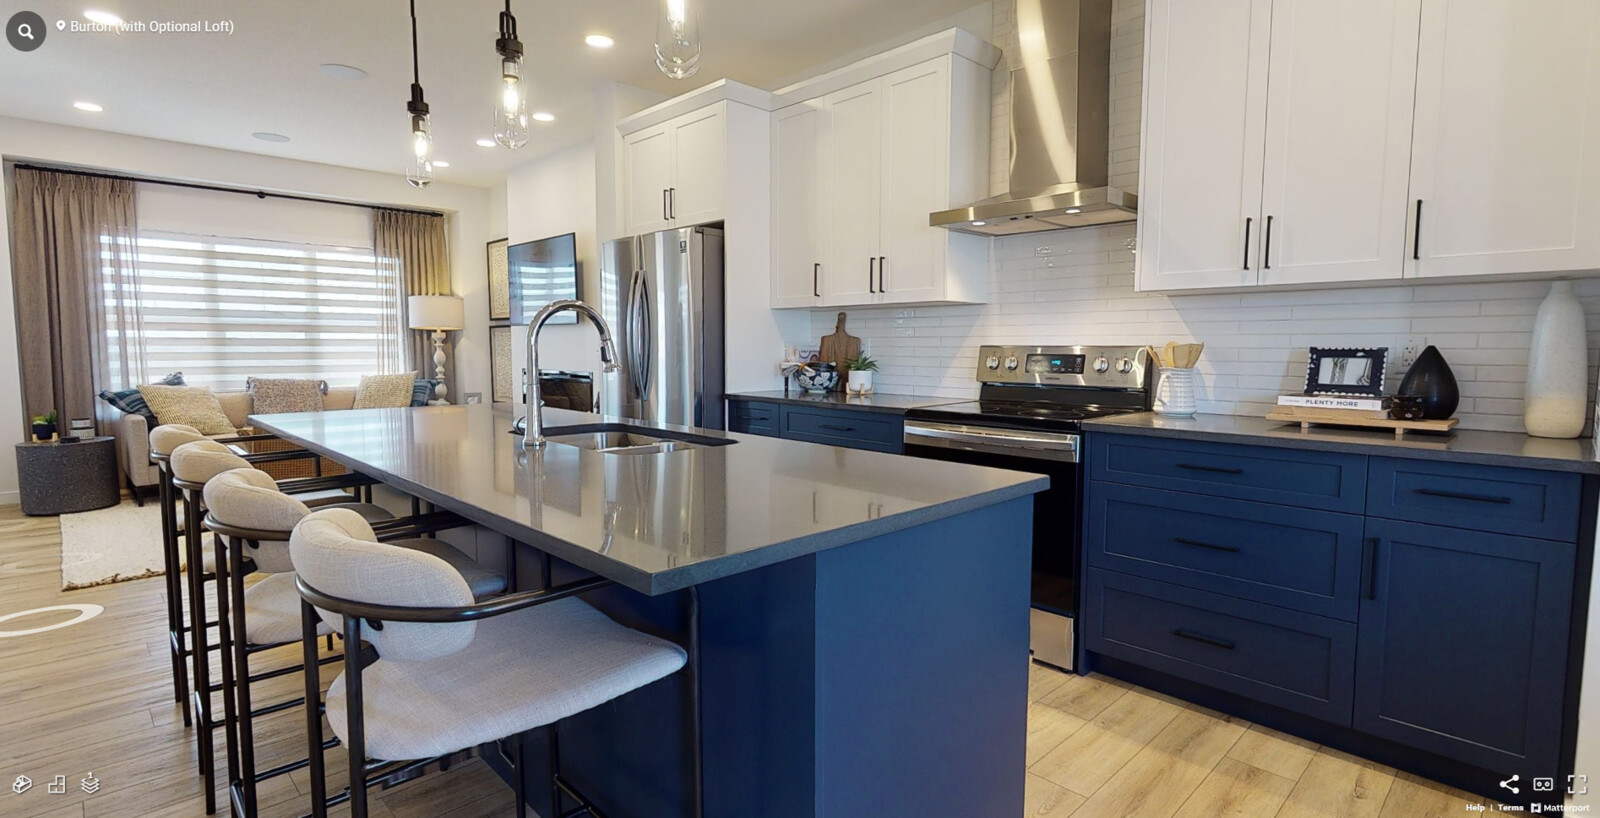 this is from the virtual photo tour from the site https://www.excelhomes.ca/new-home/heartland/burton